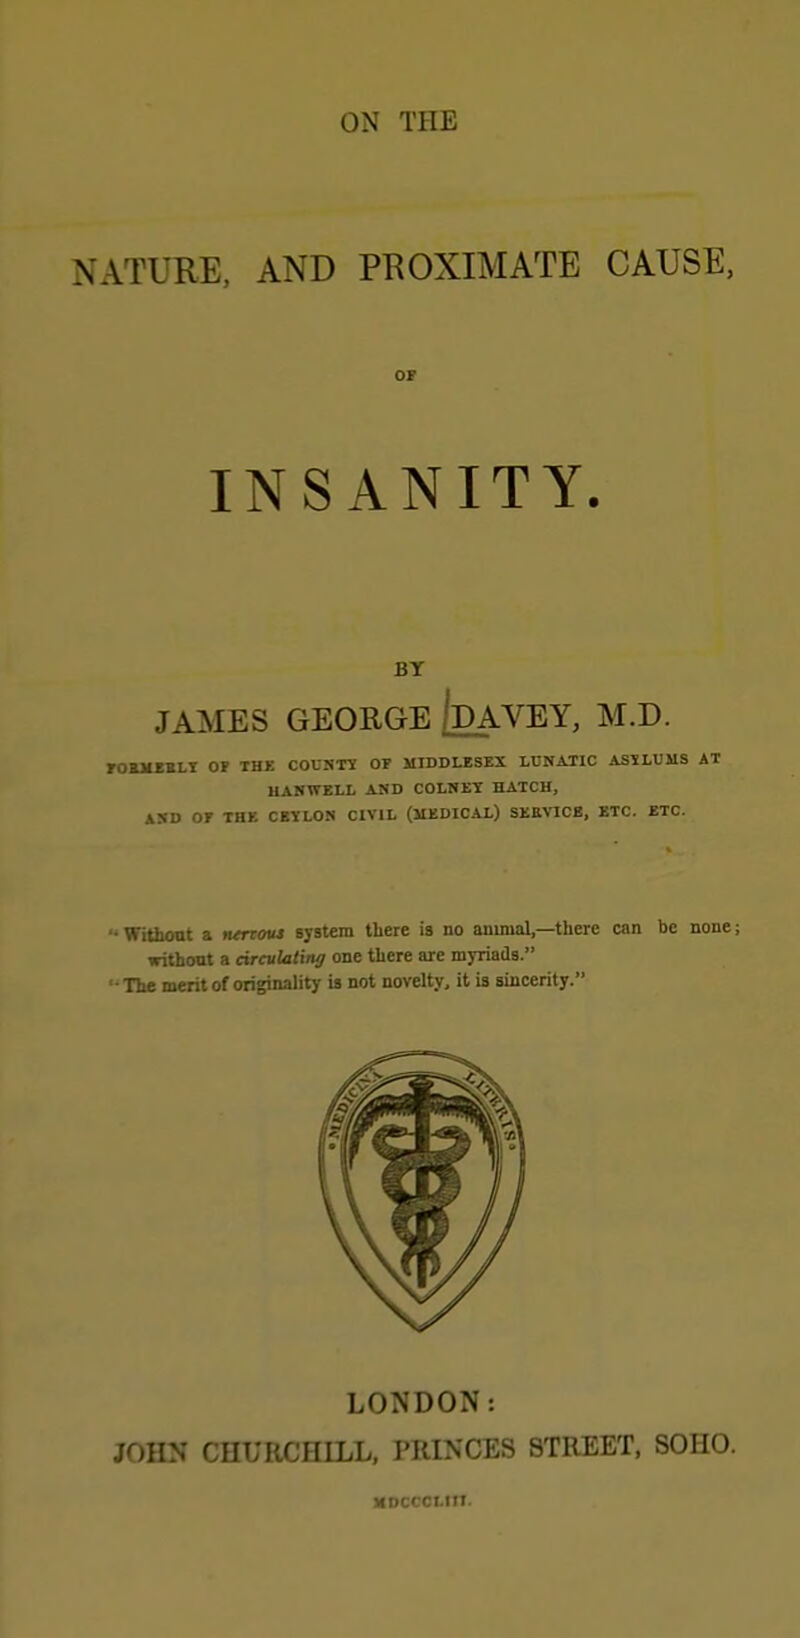 ON THE NATURE, AND PROXIMATE CAUSE, OF INSANITY. BT JAMES GEORGE /dAVEY, M.D. FOBMEBLY OF THE COUNT? OF MIDDLESEX LUNATIC ASYLUMS AT UANWELL AND COLNET HATCH, AND OF THE CEYLON CIVIL (MEDICAL) SERVICE, ETC. ETC. '• Without a nerroui system there is no animal,—there can be none; without a circulating one there are myriadB. •The merit of originality is not novelty, it is sincerity. LONDON: JOHN CHURCHILL, PRINCES STREET, SOHO. MDCCCt.HI.